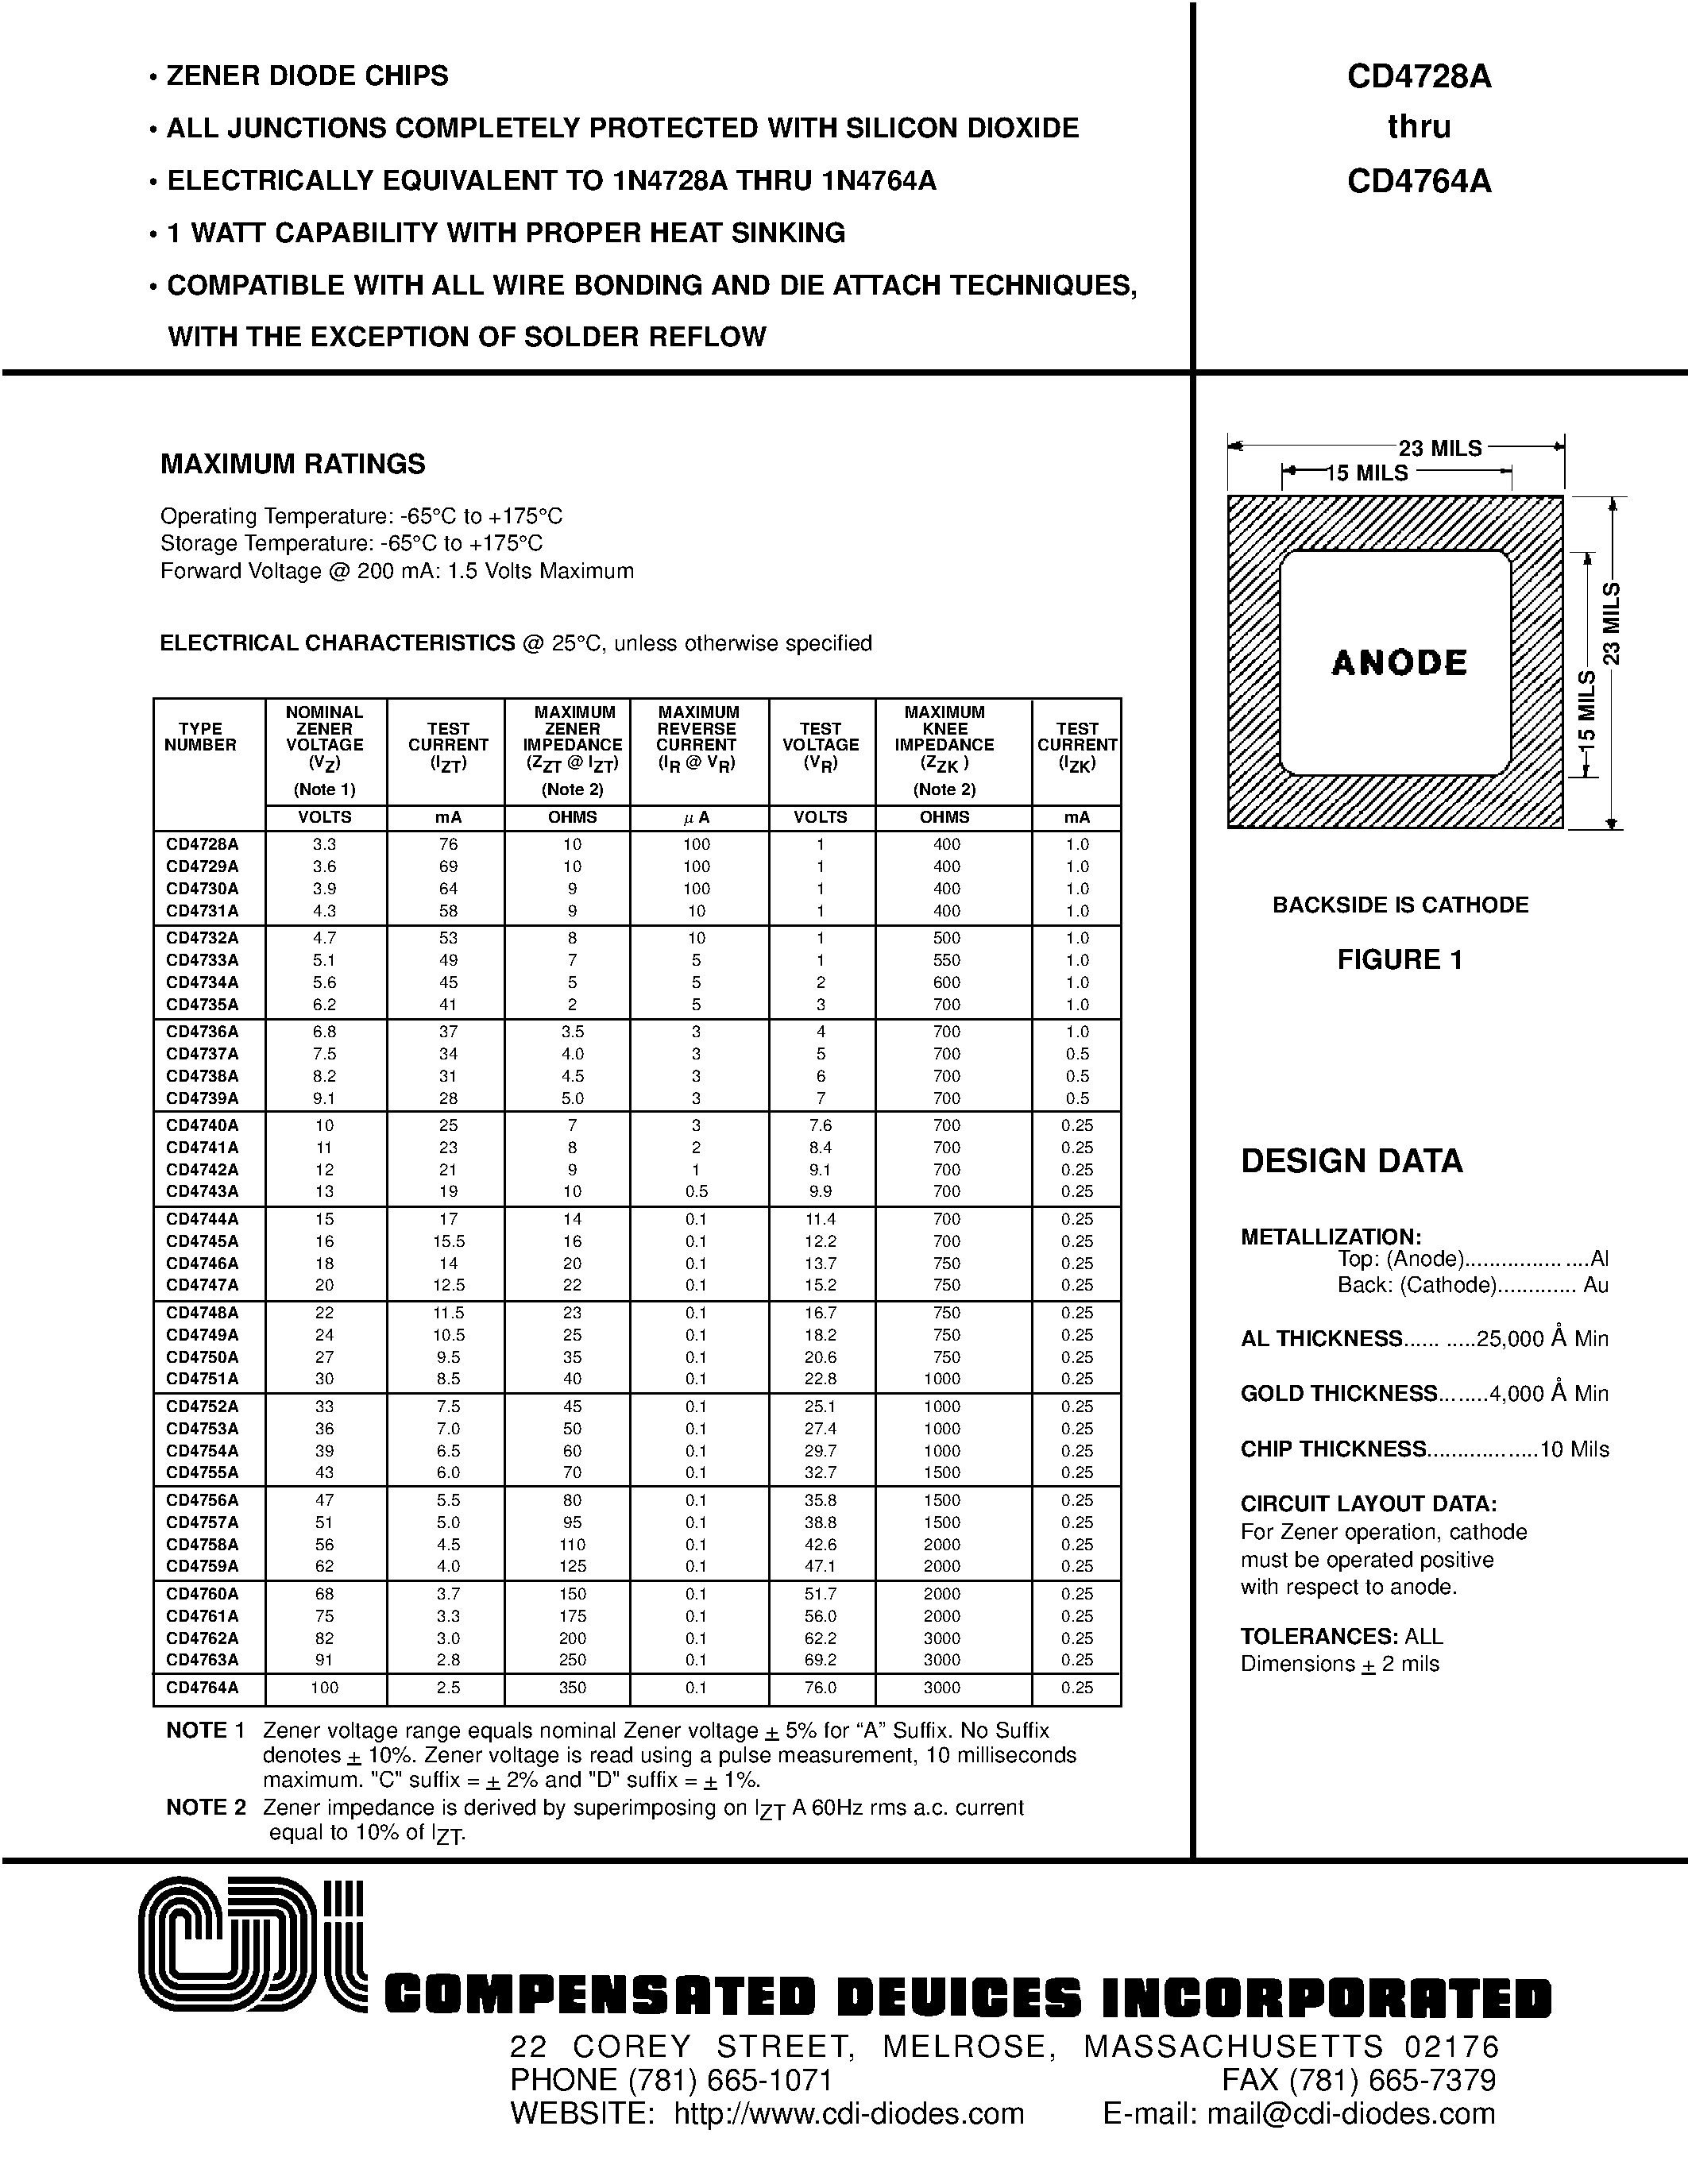 Datasheet CD4742A - ZENER DIODE CHIPS page 1